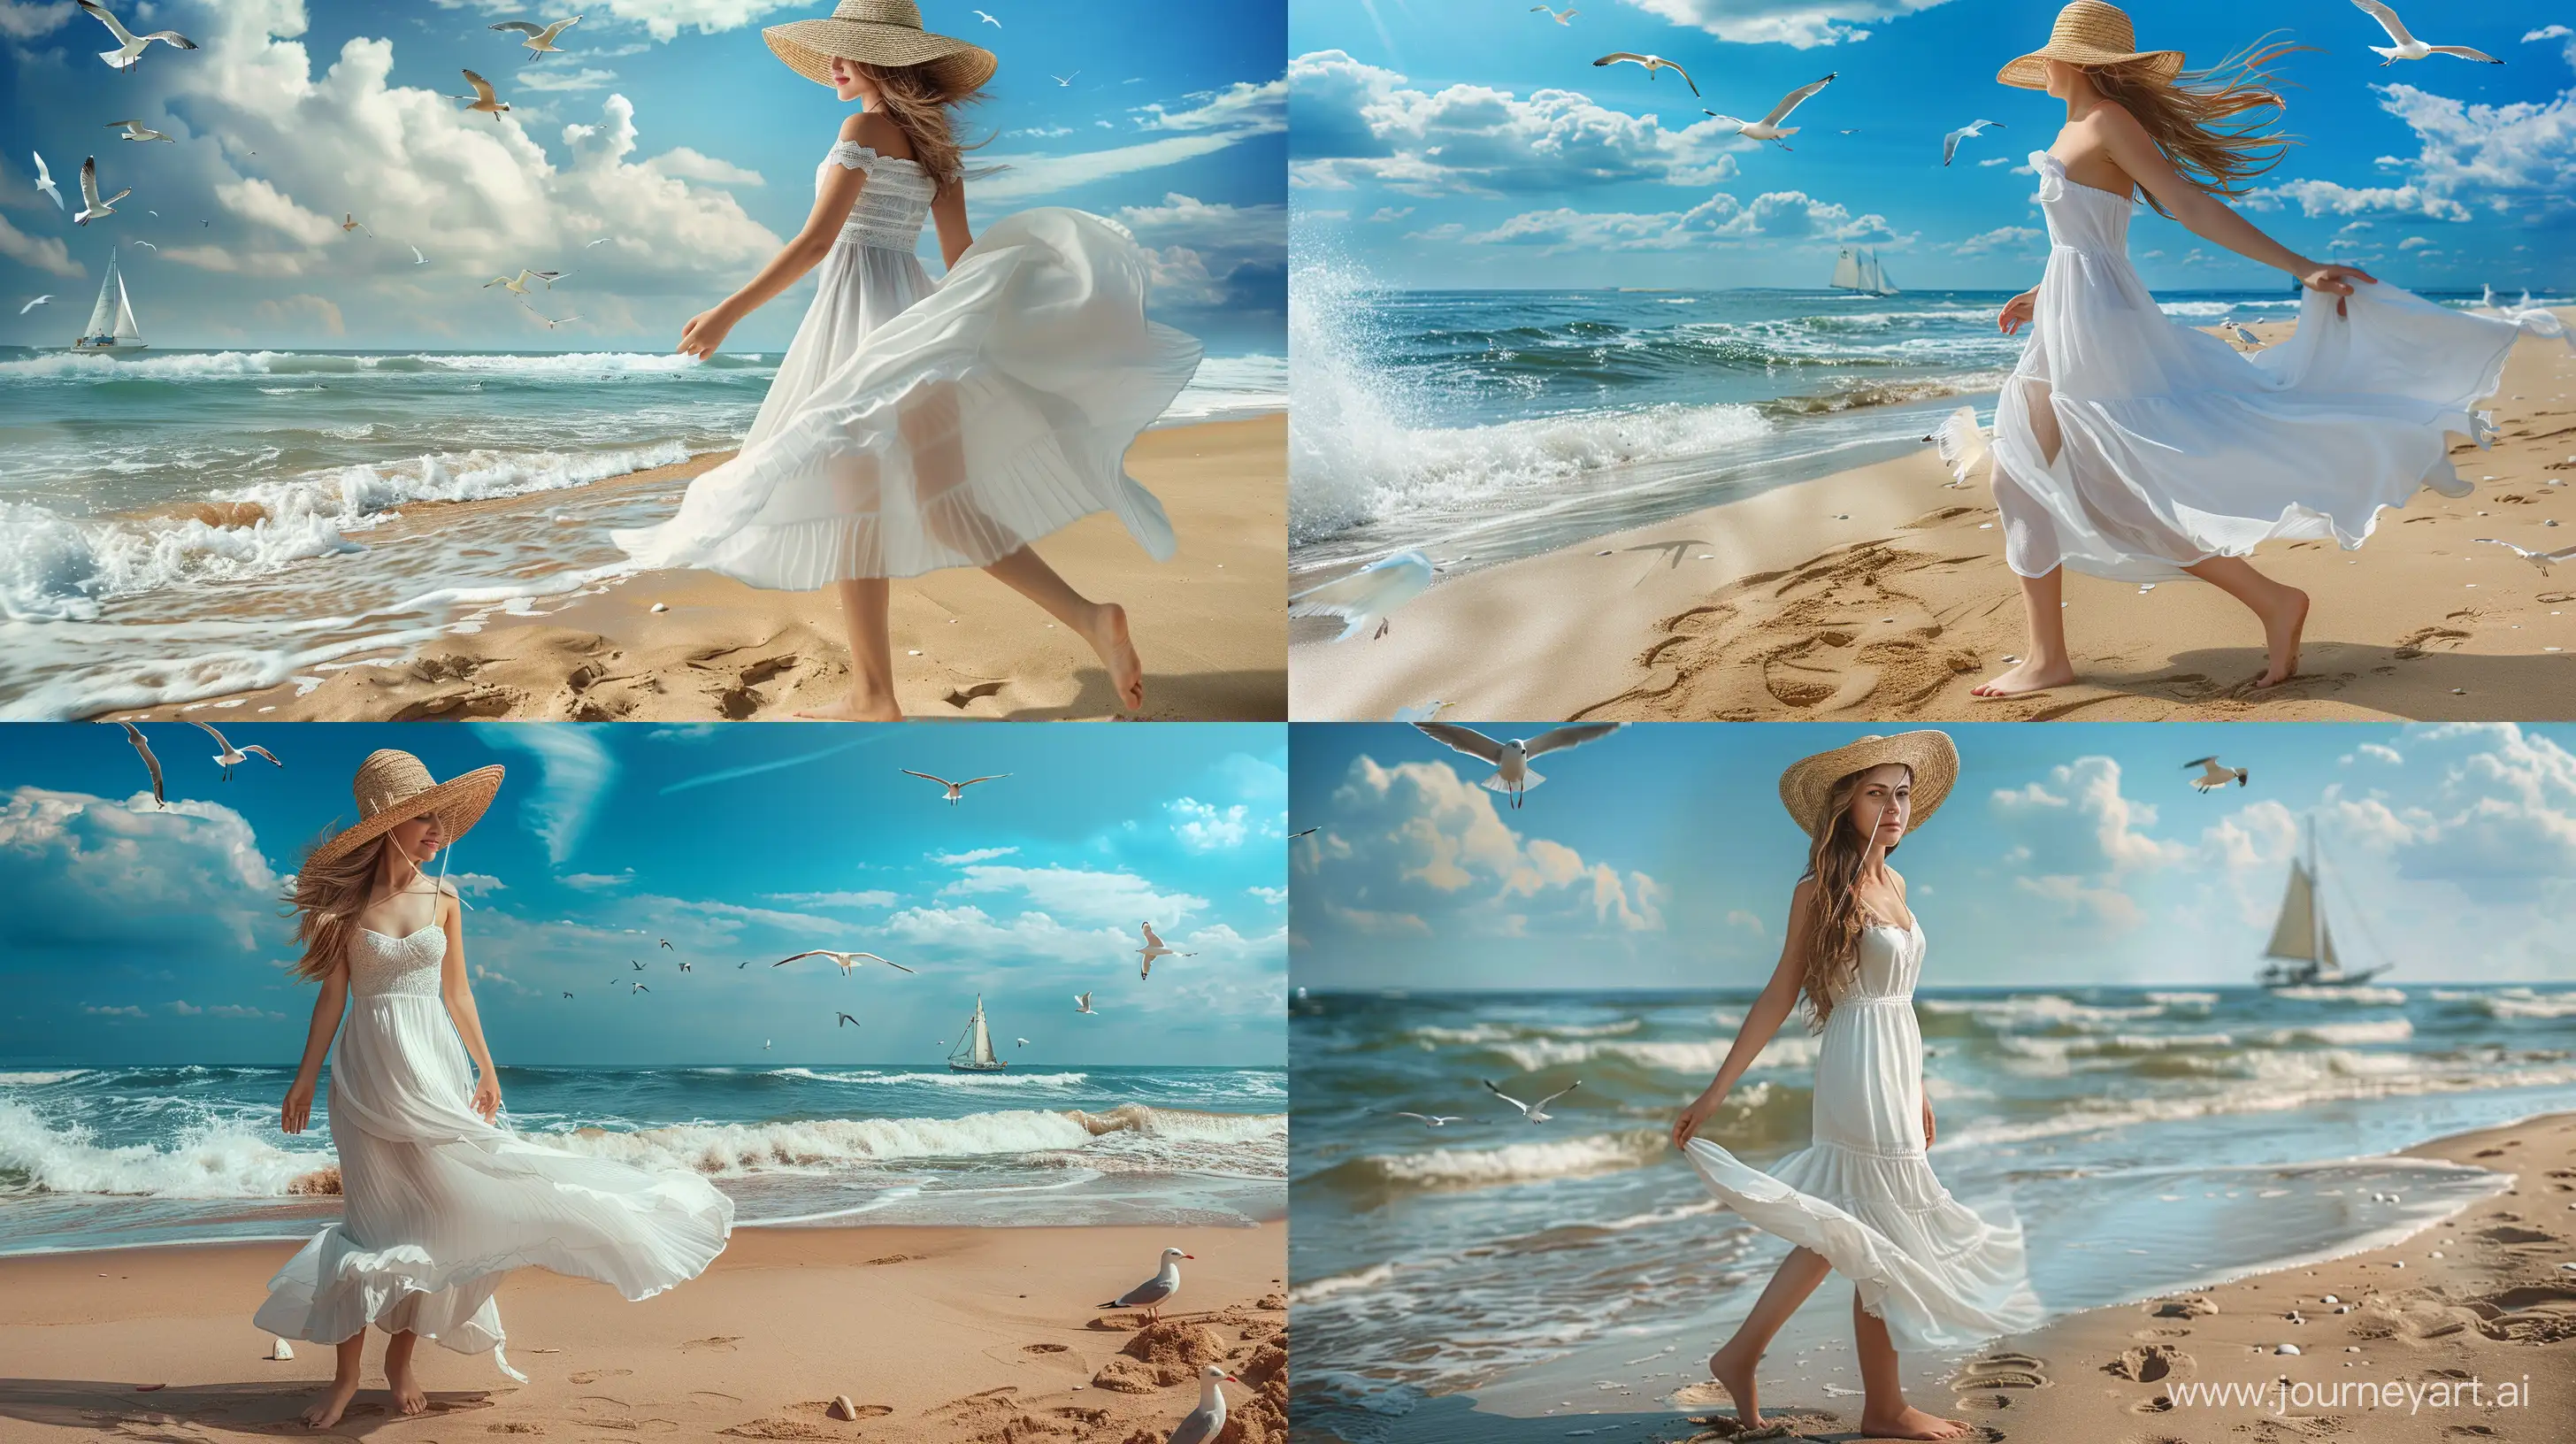 Graceful-Young-Woman-in-Flowing-Dress-Enjoying-Tranquility-on-Sandy-Beach